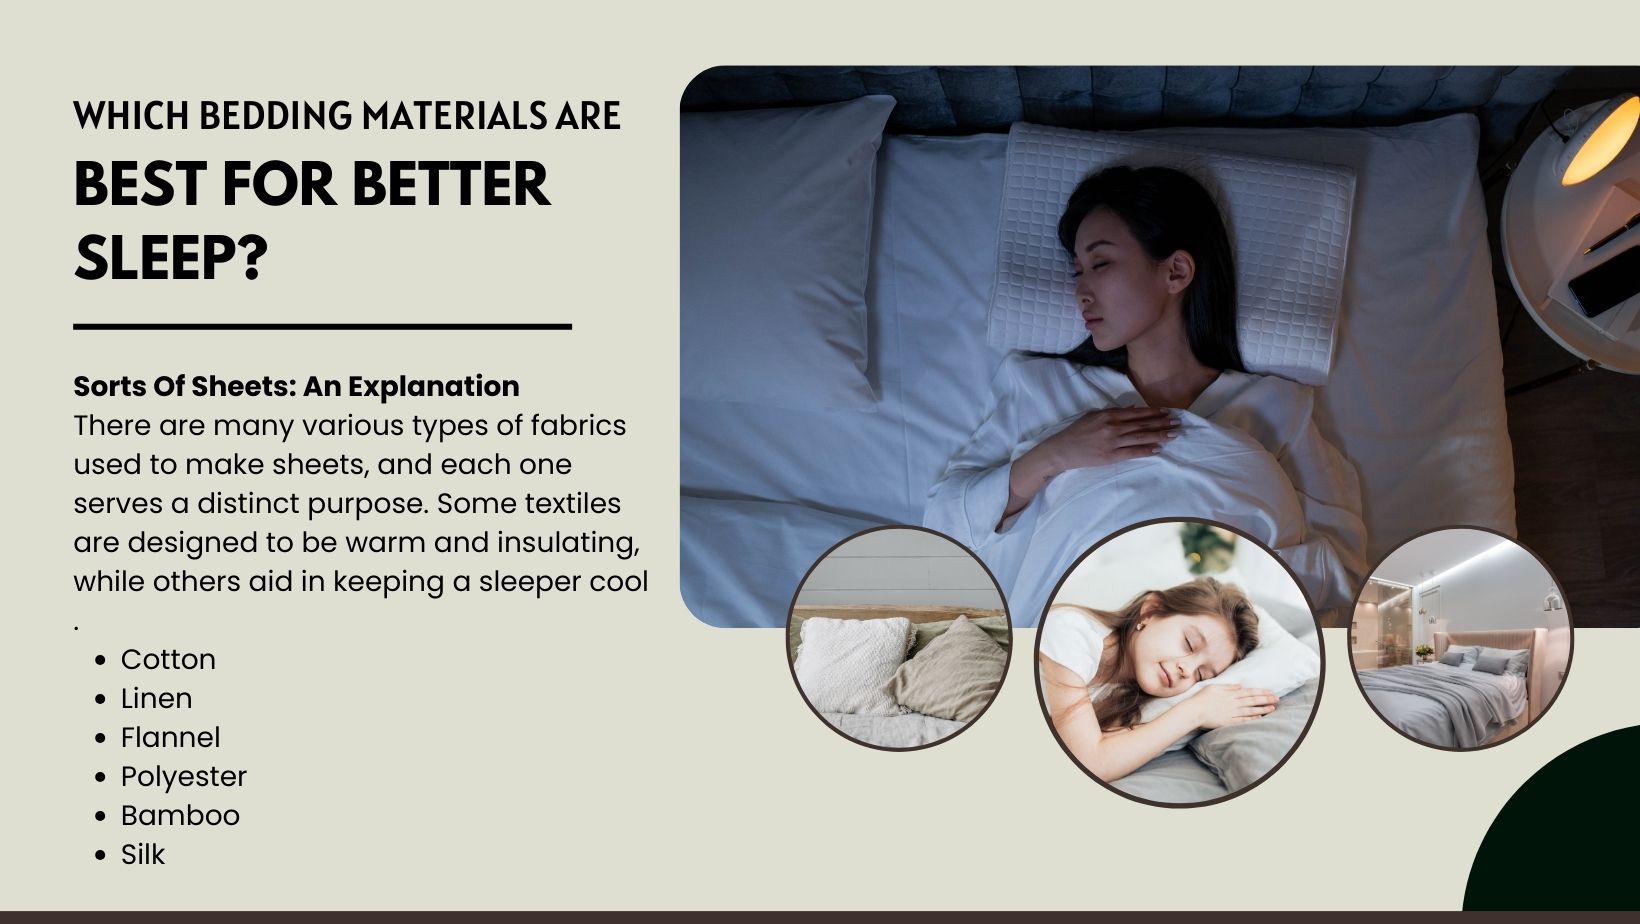 Which Bedding Materials Are Best for Better Sleep?